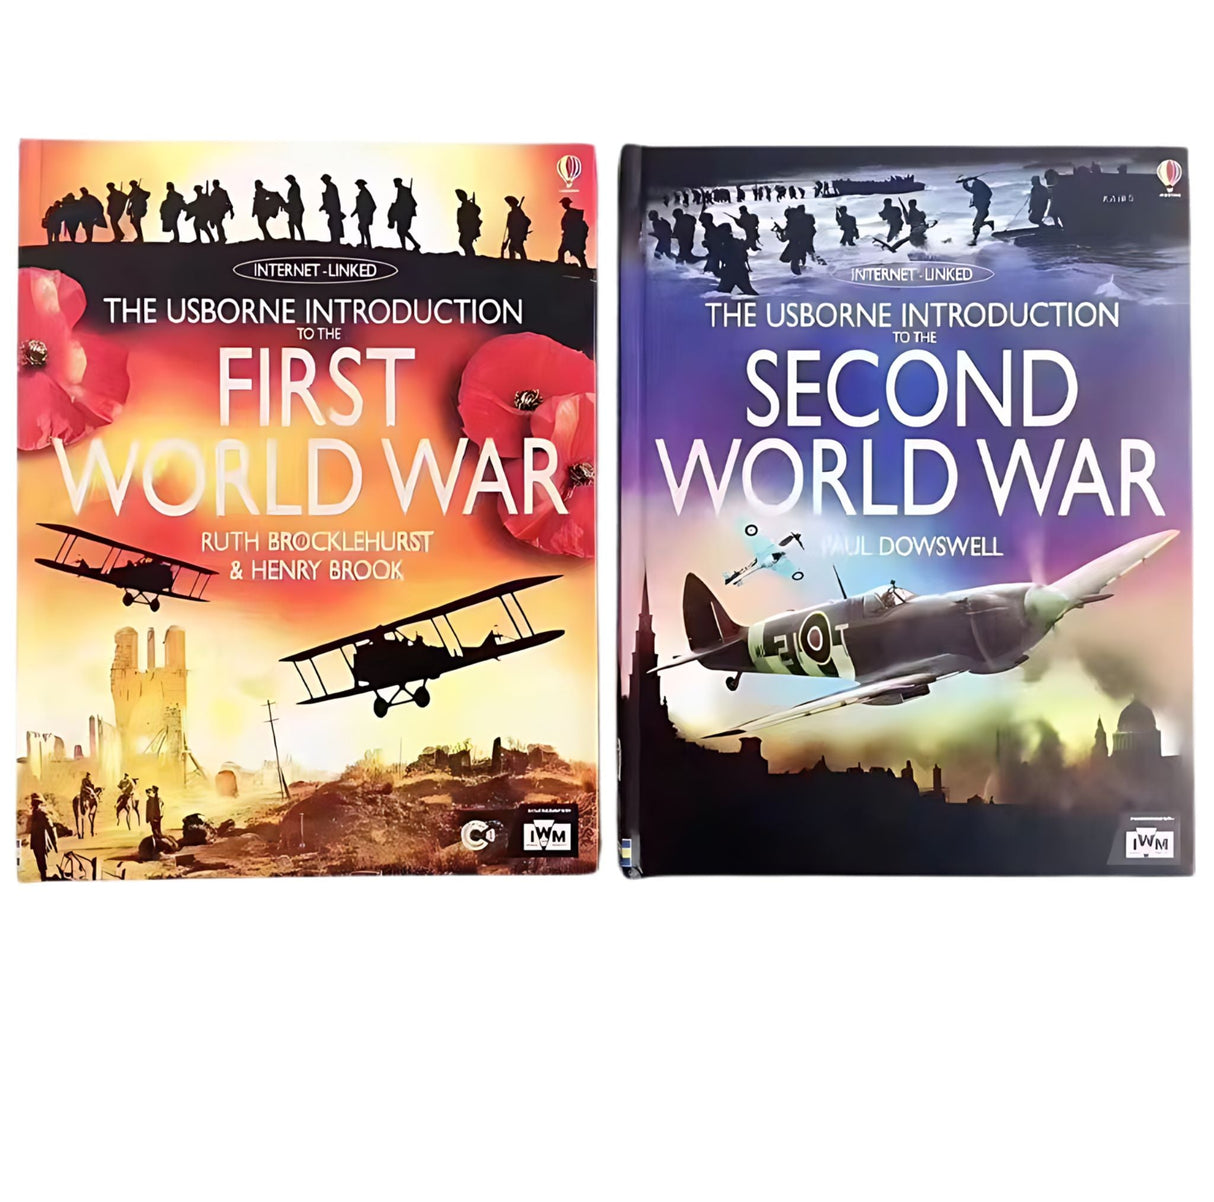 Usborne the Introduction to the First/Second World War 2 books